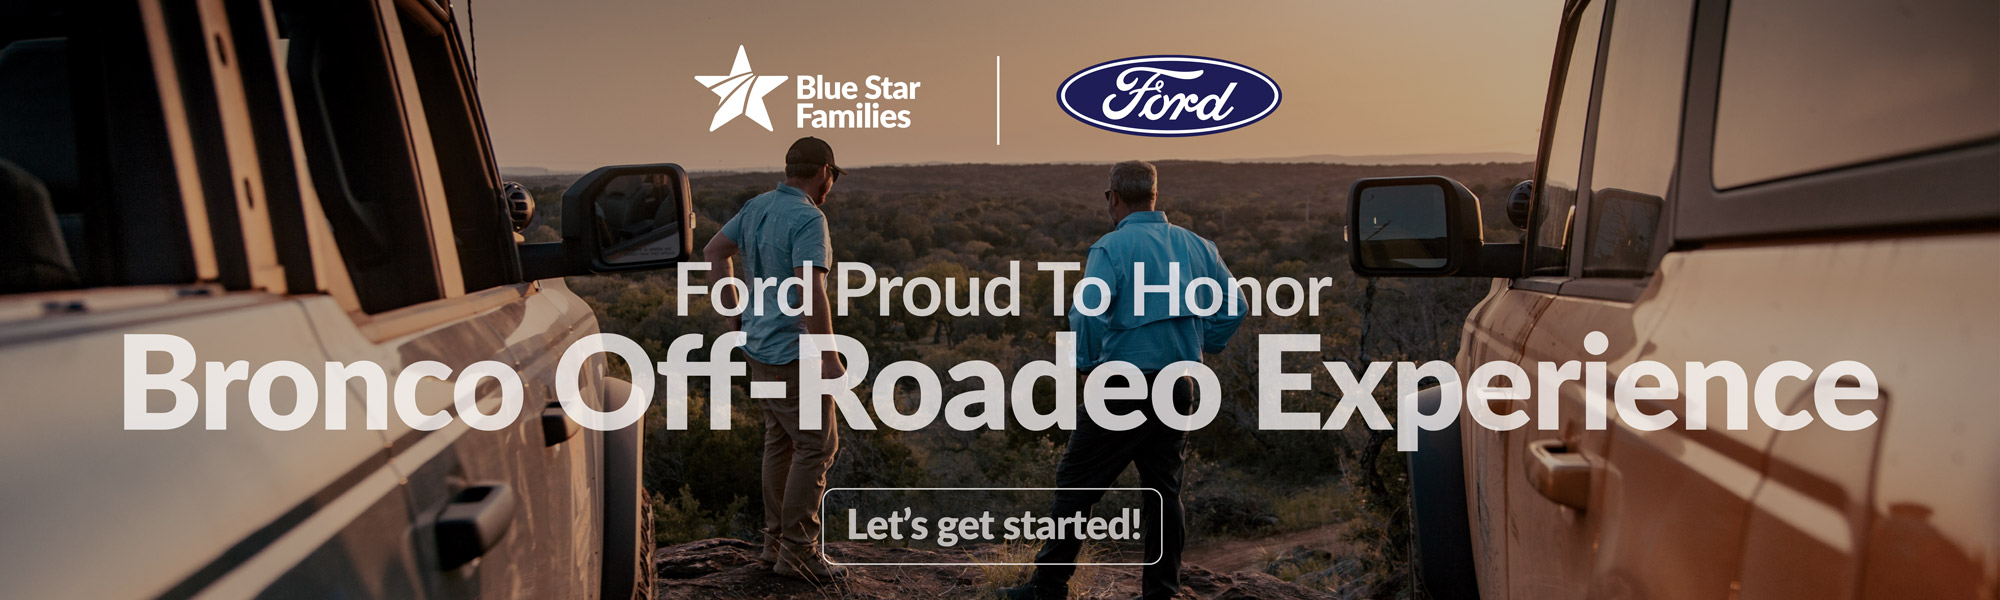 BSF_Ford_Giveaway_Apr24_Web_Header